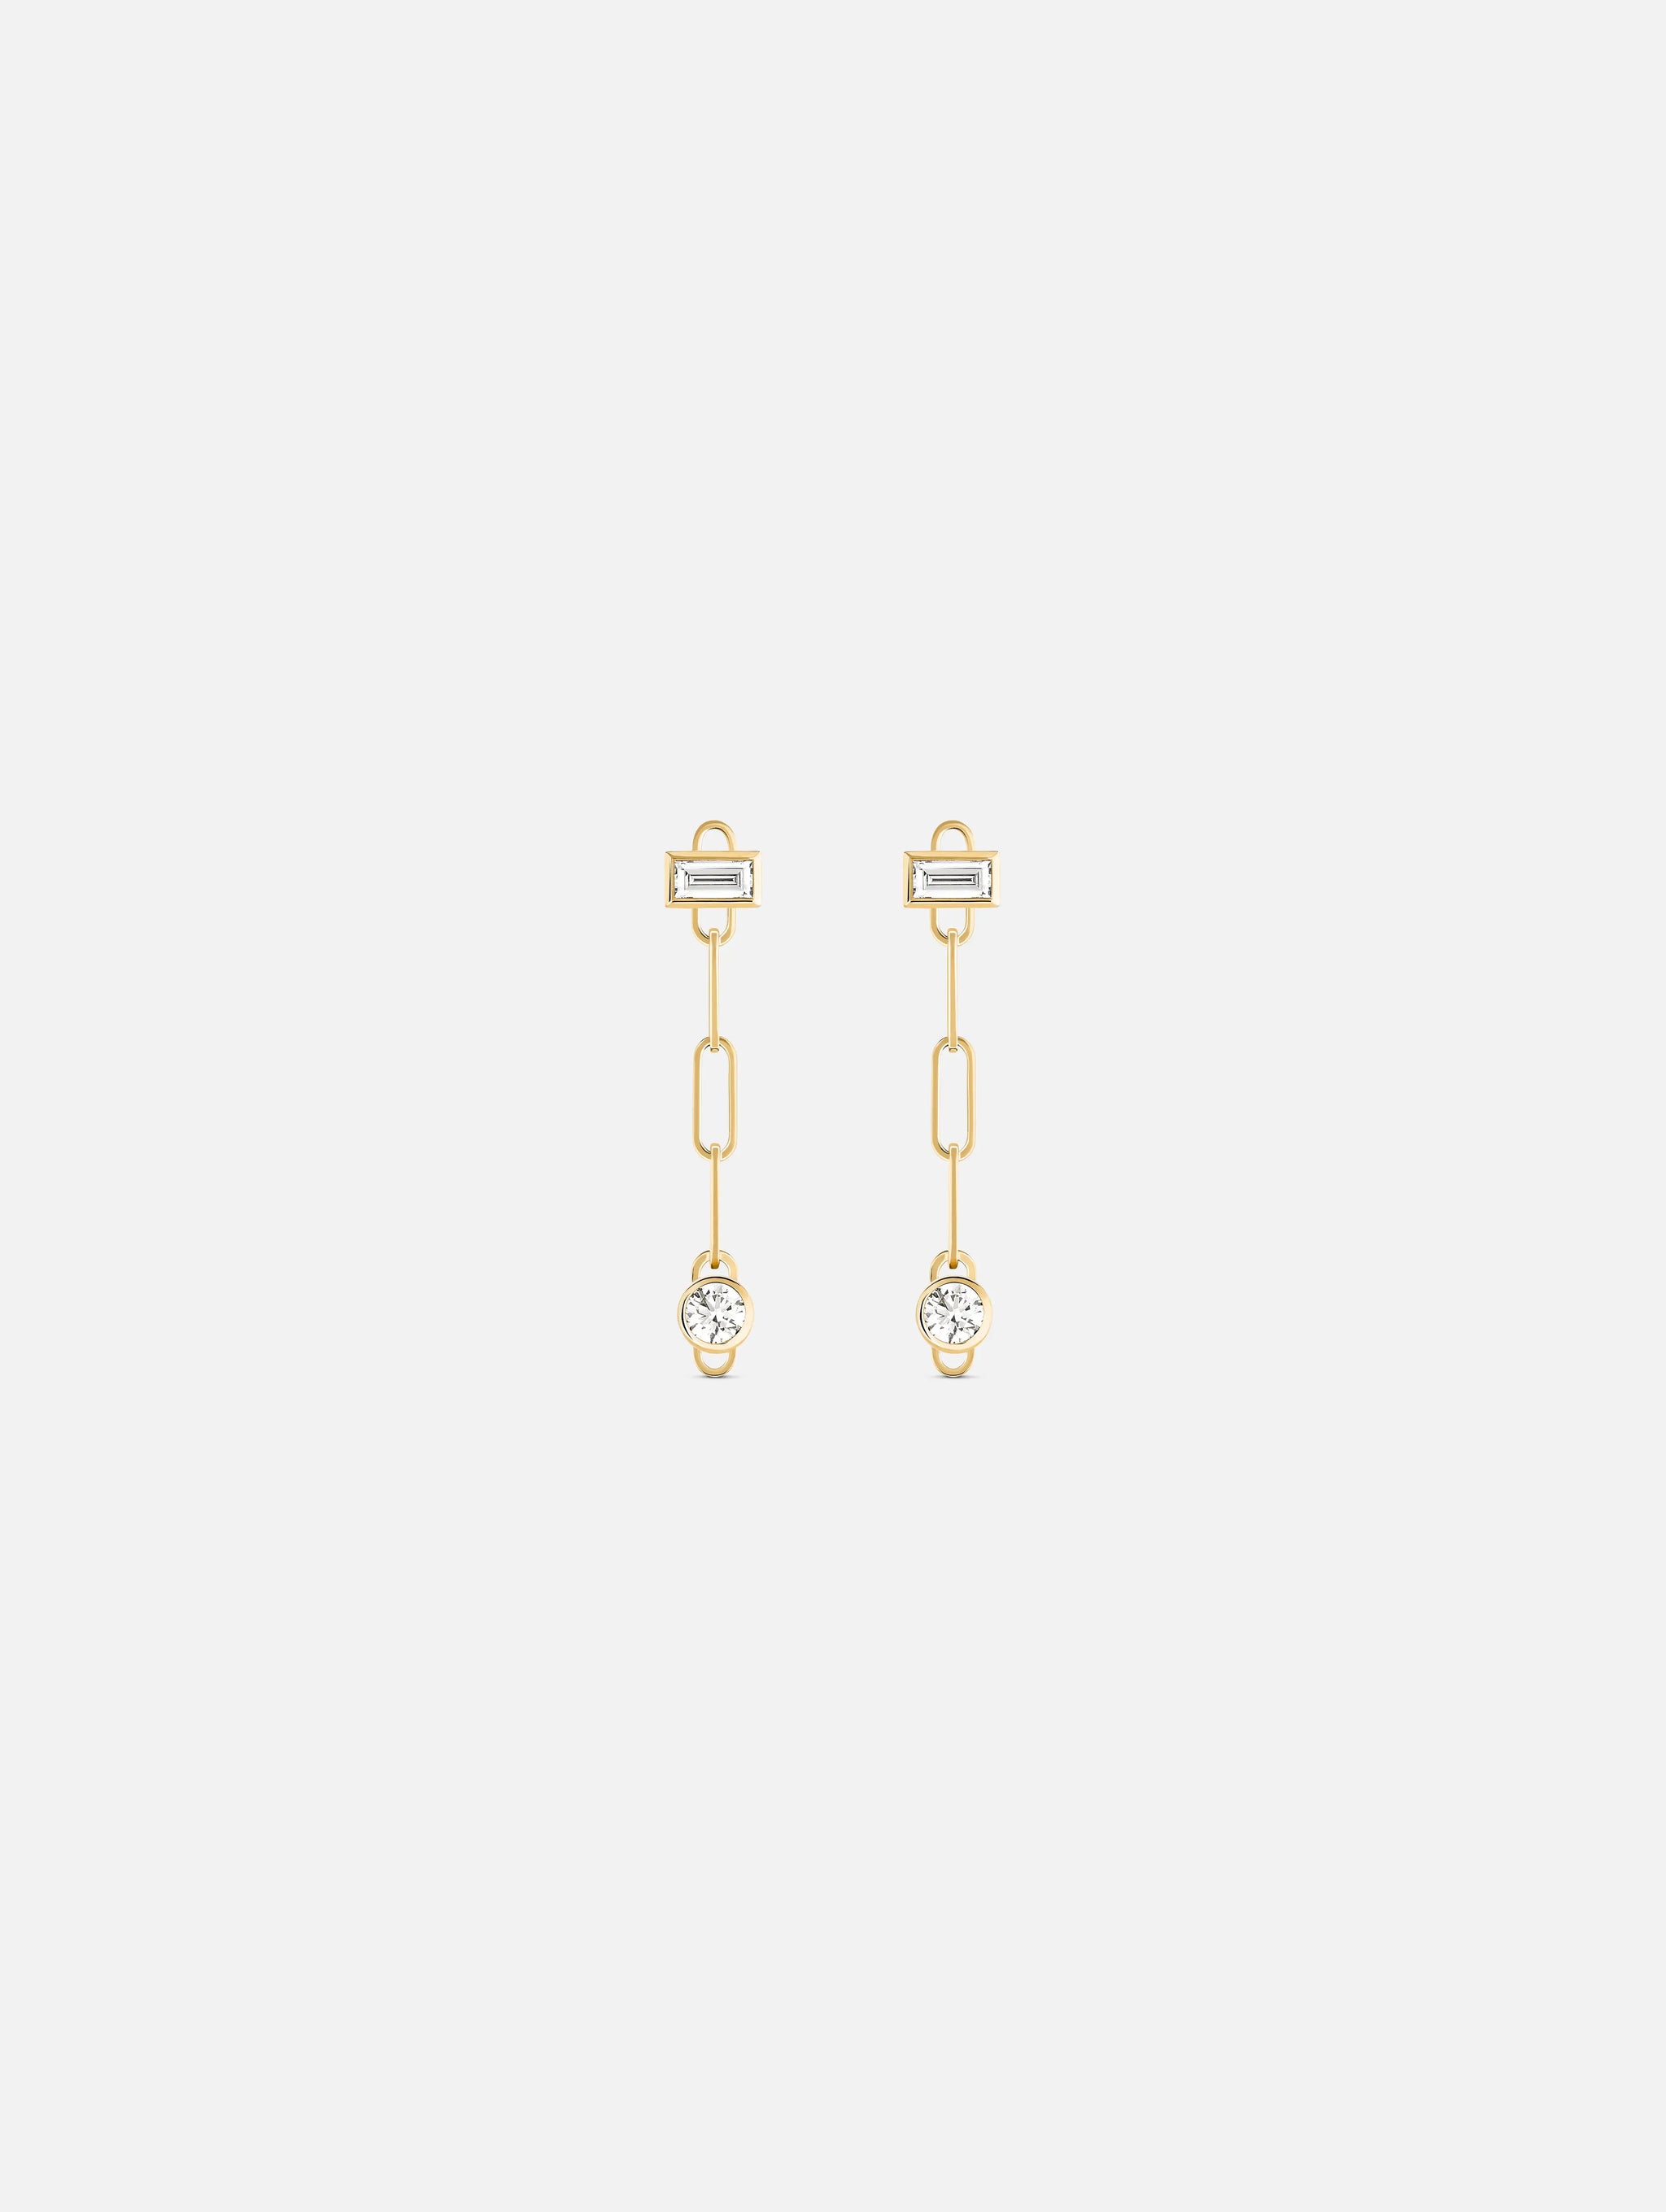 Baguette Round PM Classics Earrings in Yellow Gold - 1 - Nouvel Heritage